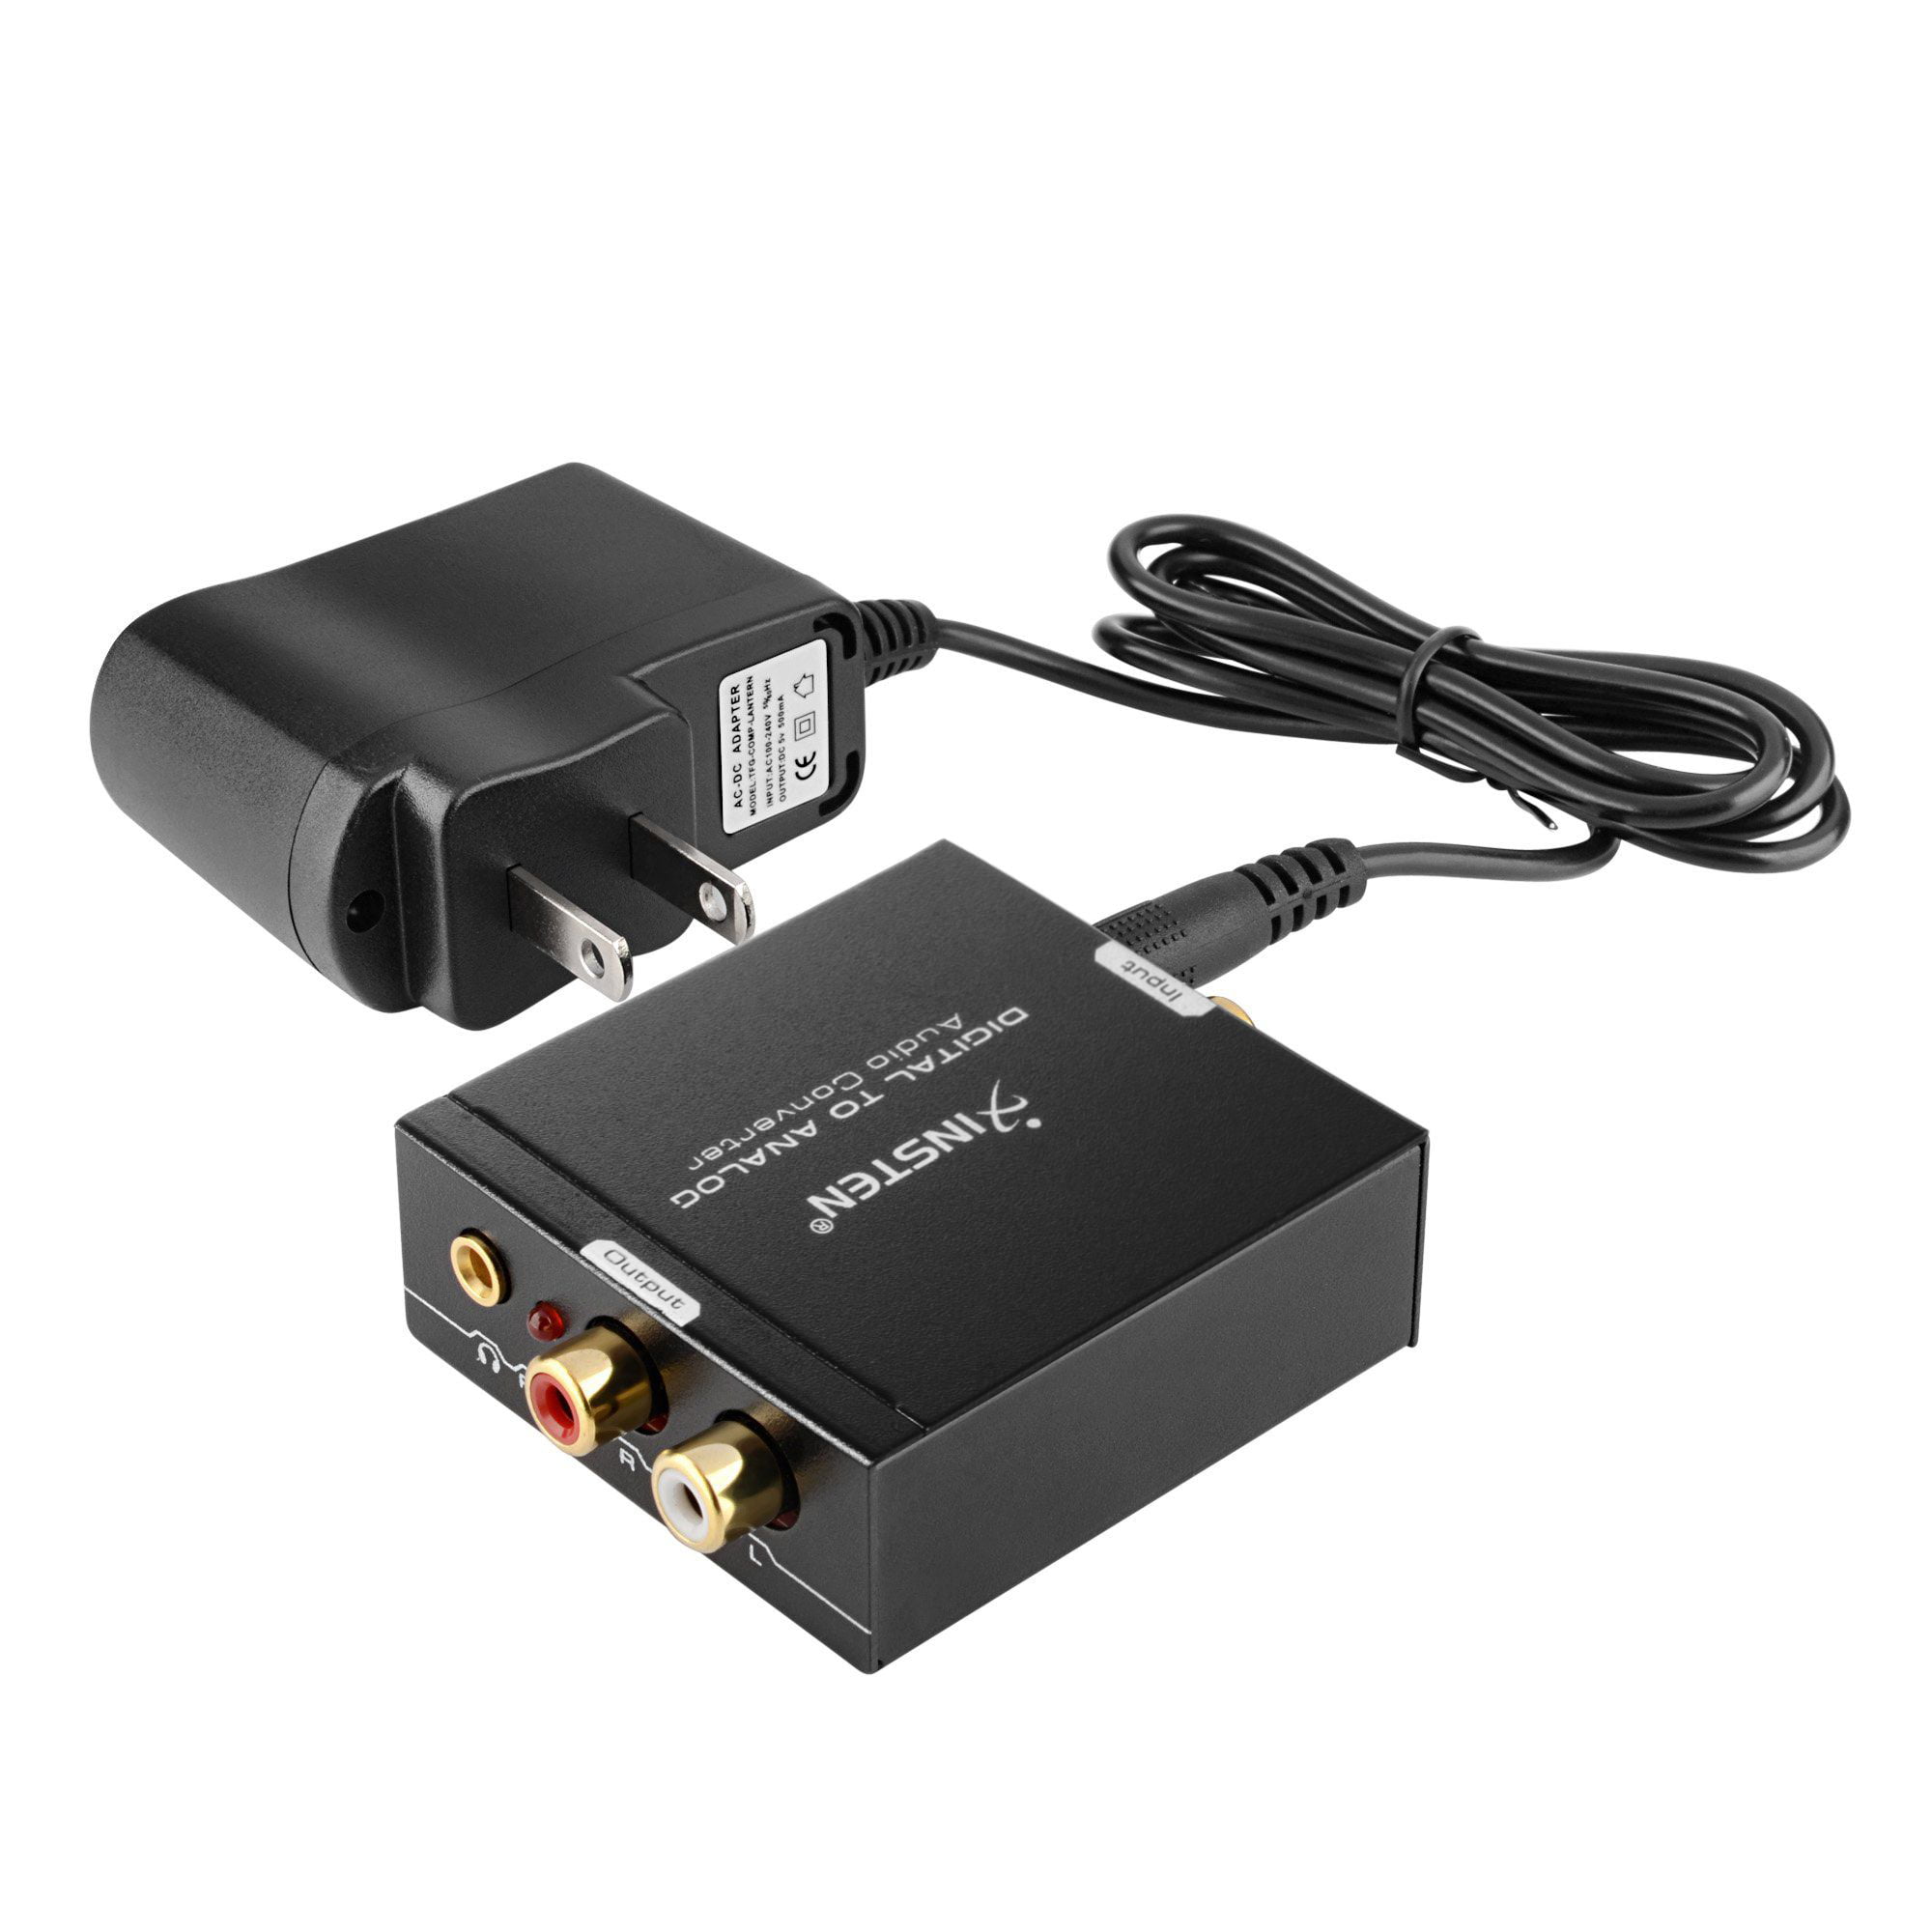 Optical Coaxial Toslink Digital to Analog Audio Converter Adapter RCA L/R 3.5 js